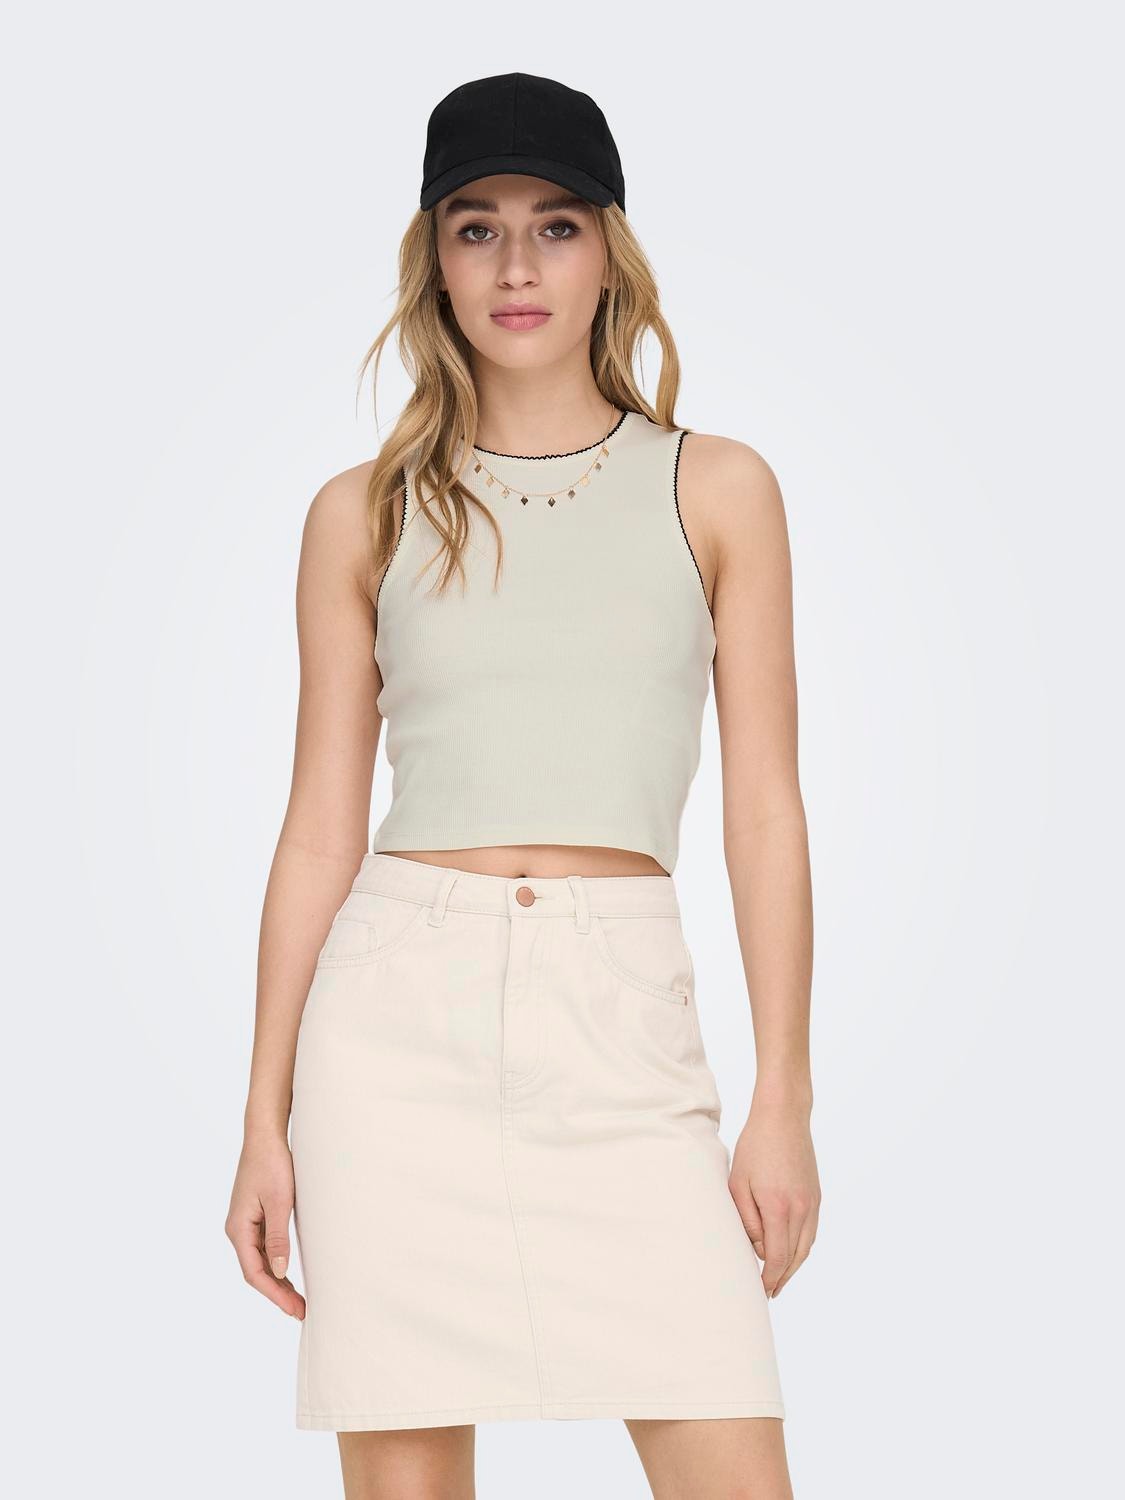 ONLY Cropped TankTop -Cloud Dancer - 15289581